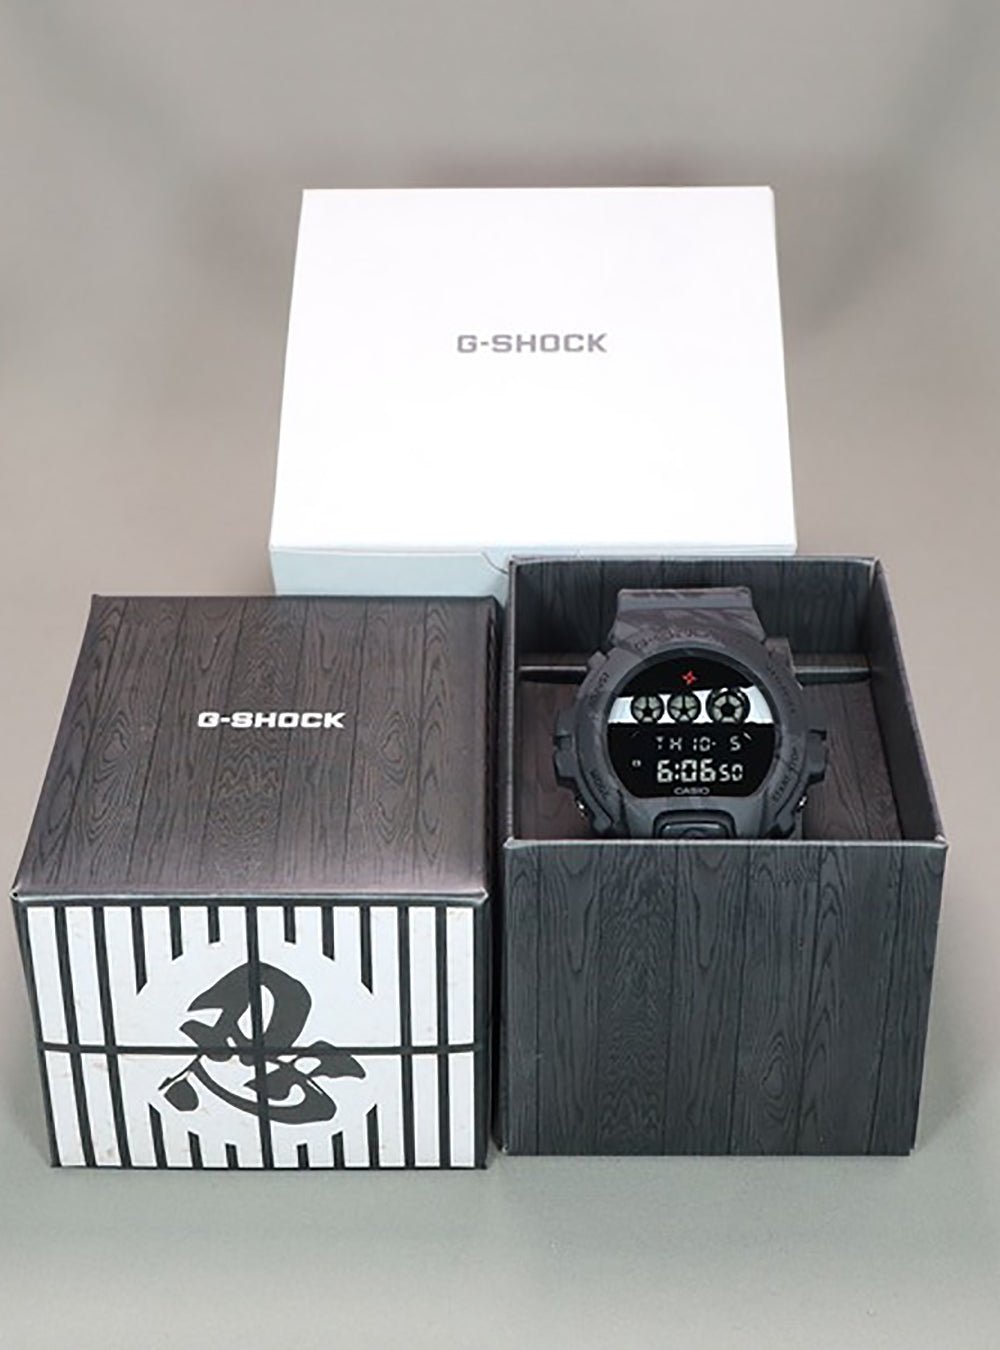 CASIO G-SHOCK NINJA SERIES LIMITED EDITION MADE IN JAPAN – japan-select